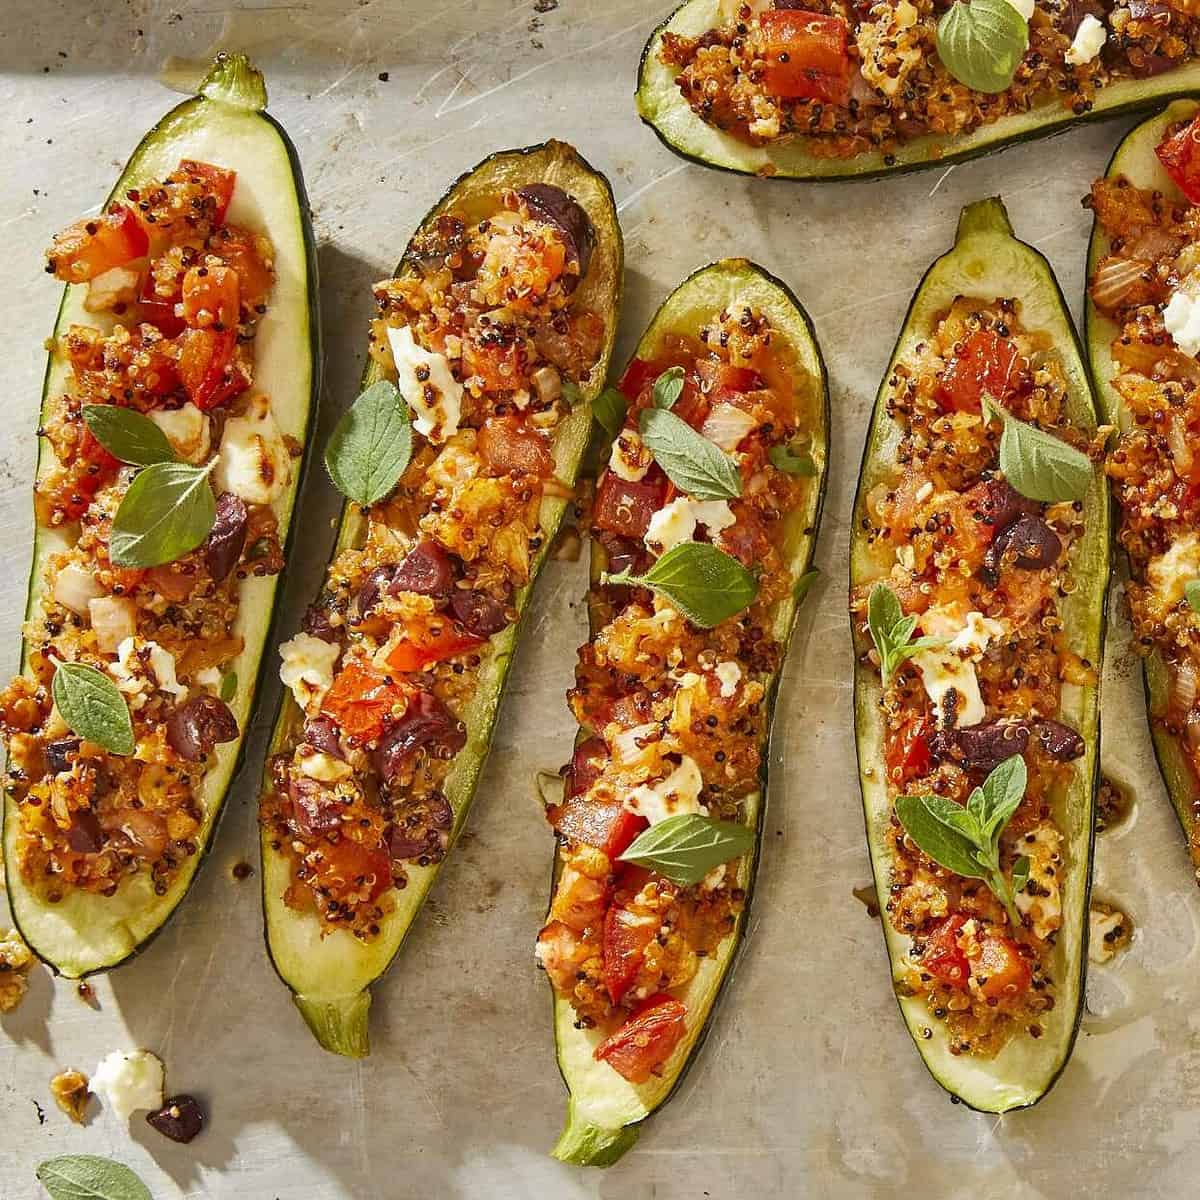  These stuffed zucchinis will steal the show at any dinner party